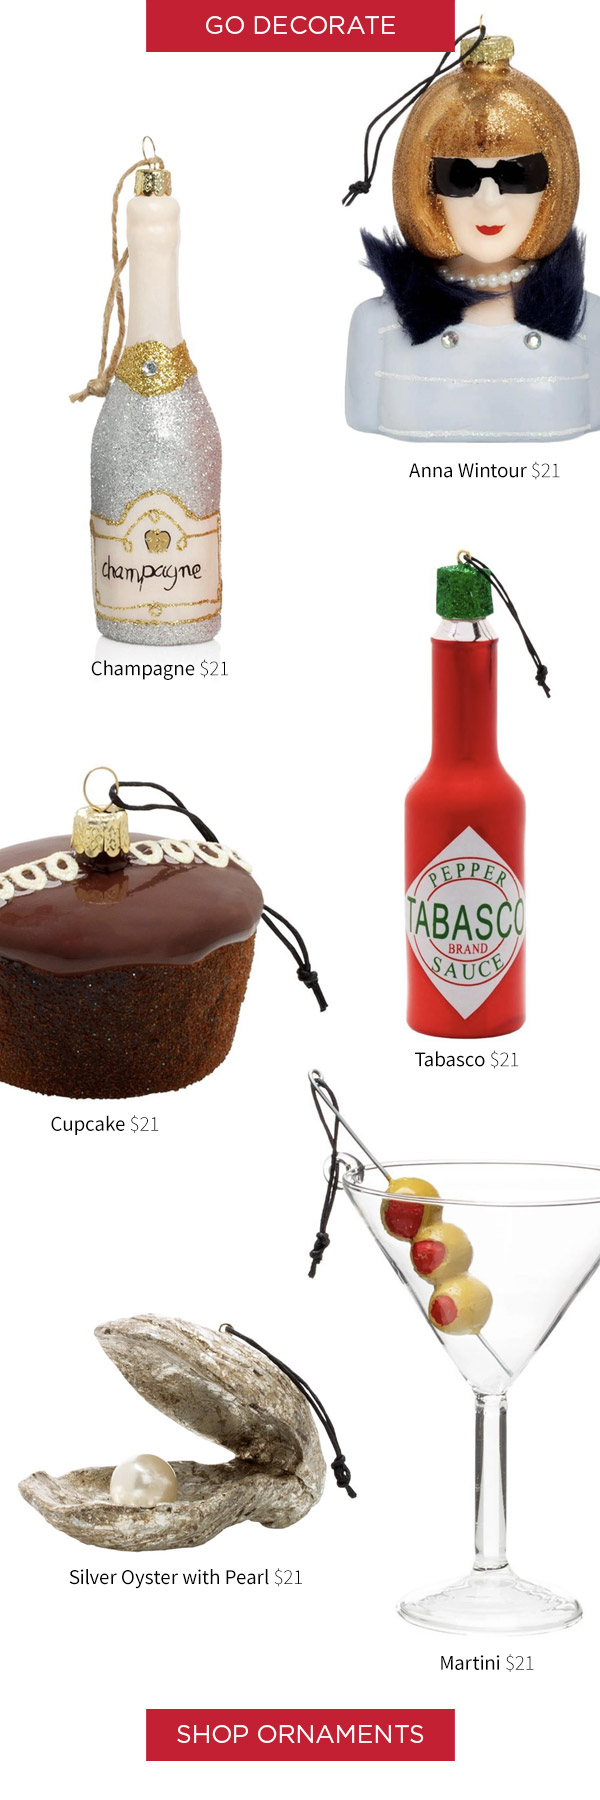 Champagne, Anna Wintour, Cupcake, Tabasco, Silver Oyster with Pearl and Martini $21.